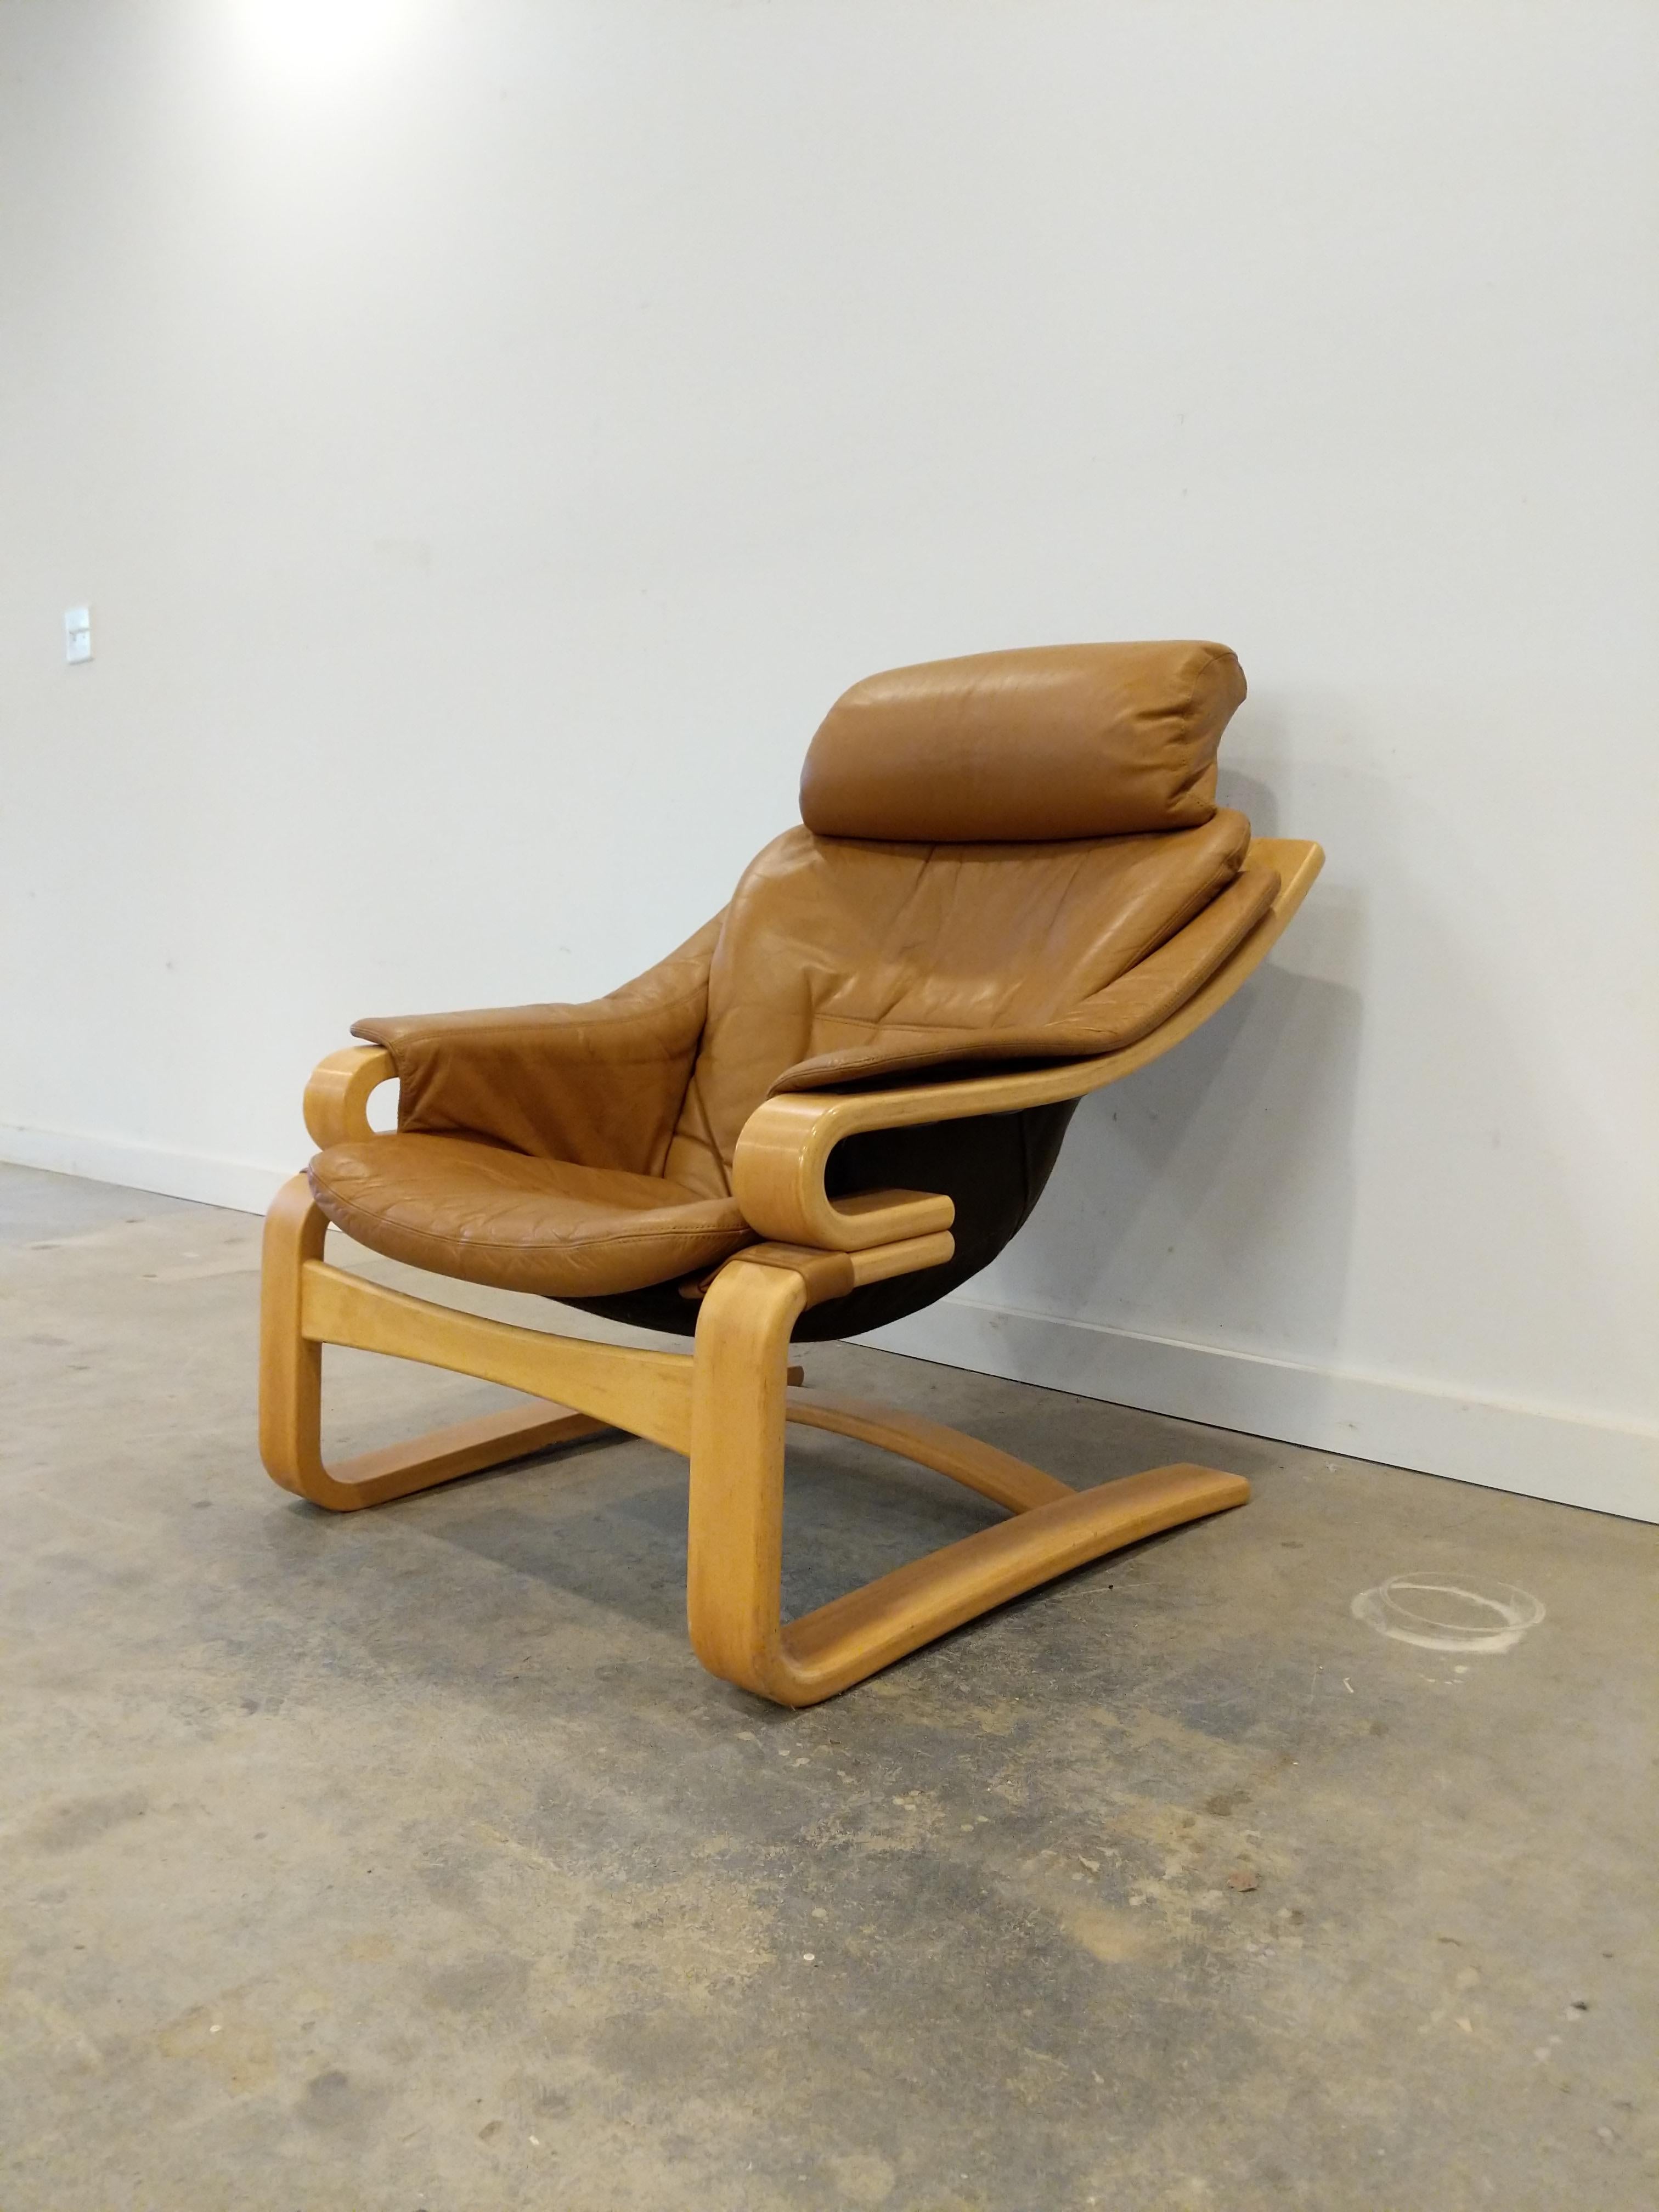 Leather Vintage Danish Modern Lounge Chair by Svend Skipper For Sale